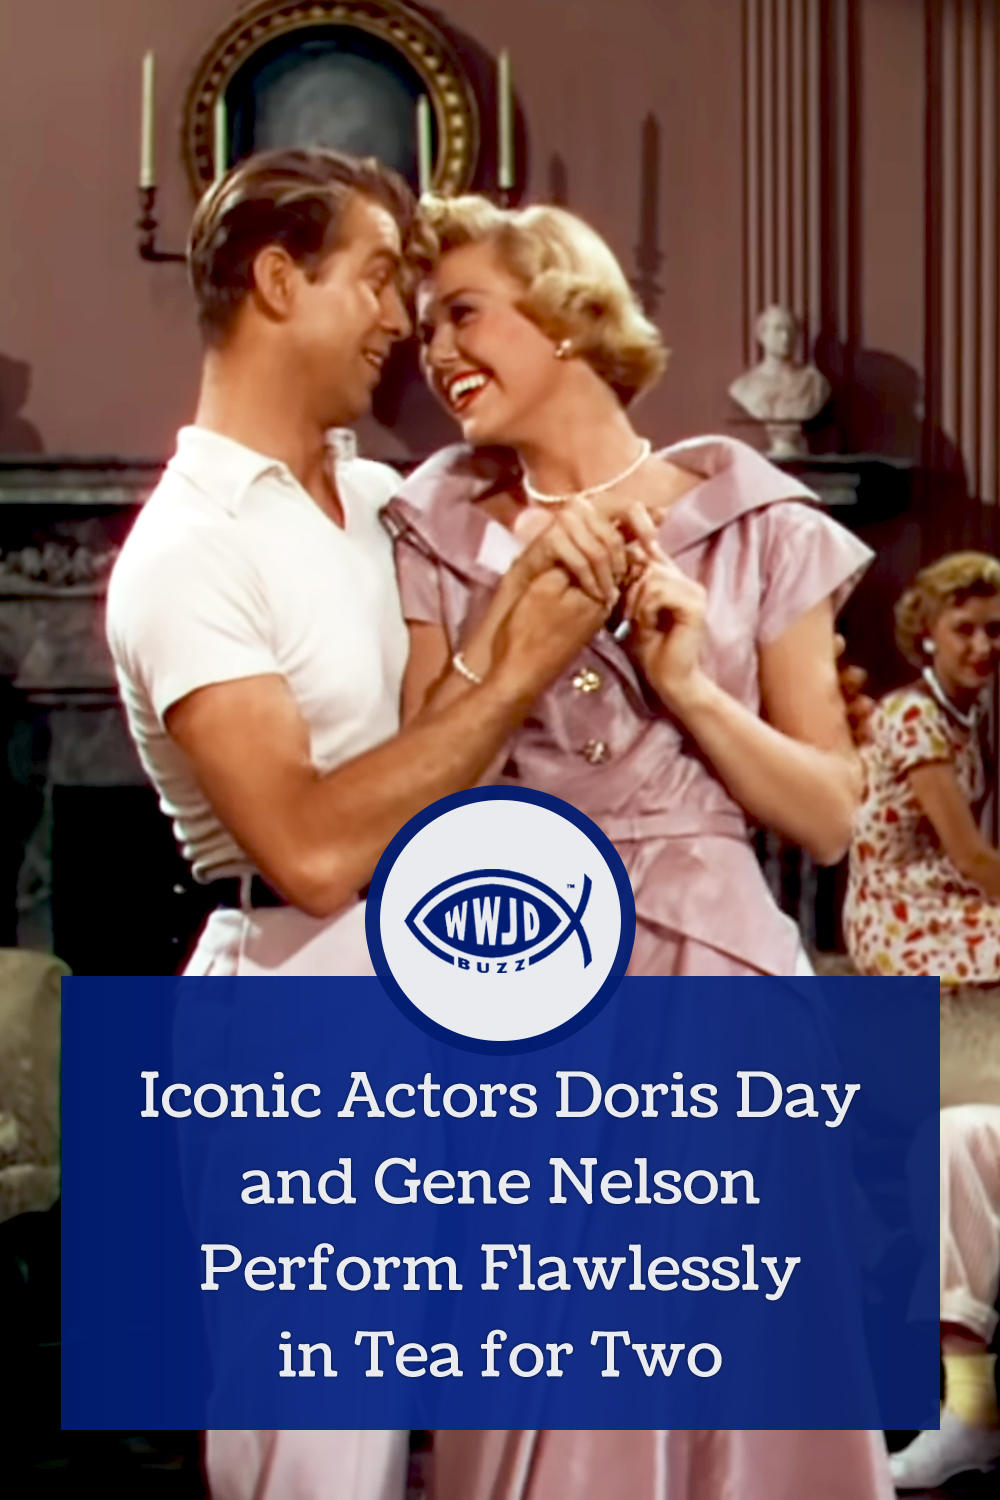 Iconic Actors Doris Day and Gene Nelson Perform Flawlessly in Tea for Two